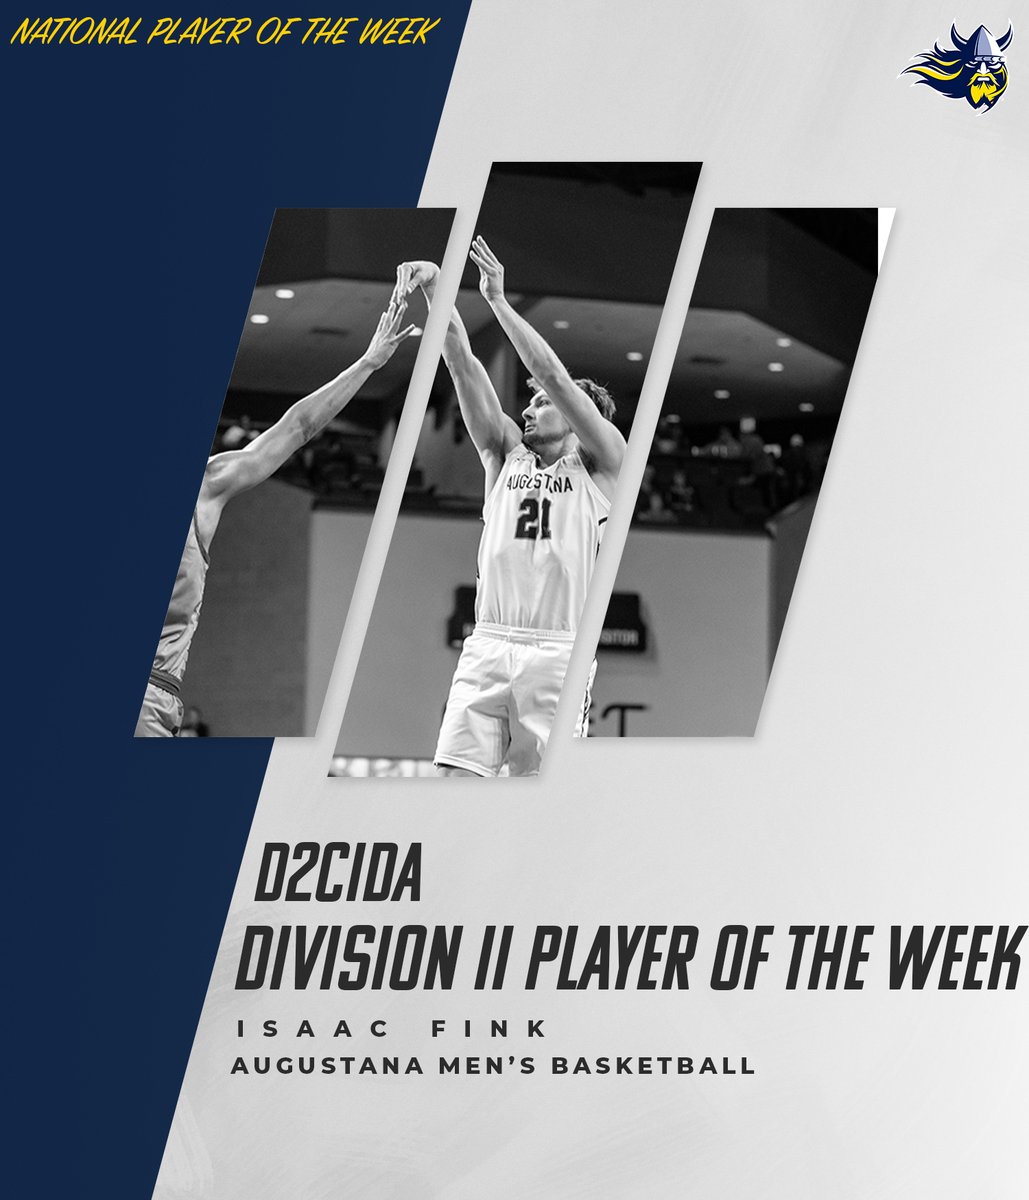 NSIC Player of the Week ✔️ D2CIDA National Player of the Week ✔️✔️ @ikefink3 is doing things on a national level ⚔️ Full Story ➡️ bit.ly/3TevBzS #BuildingChampions